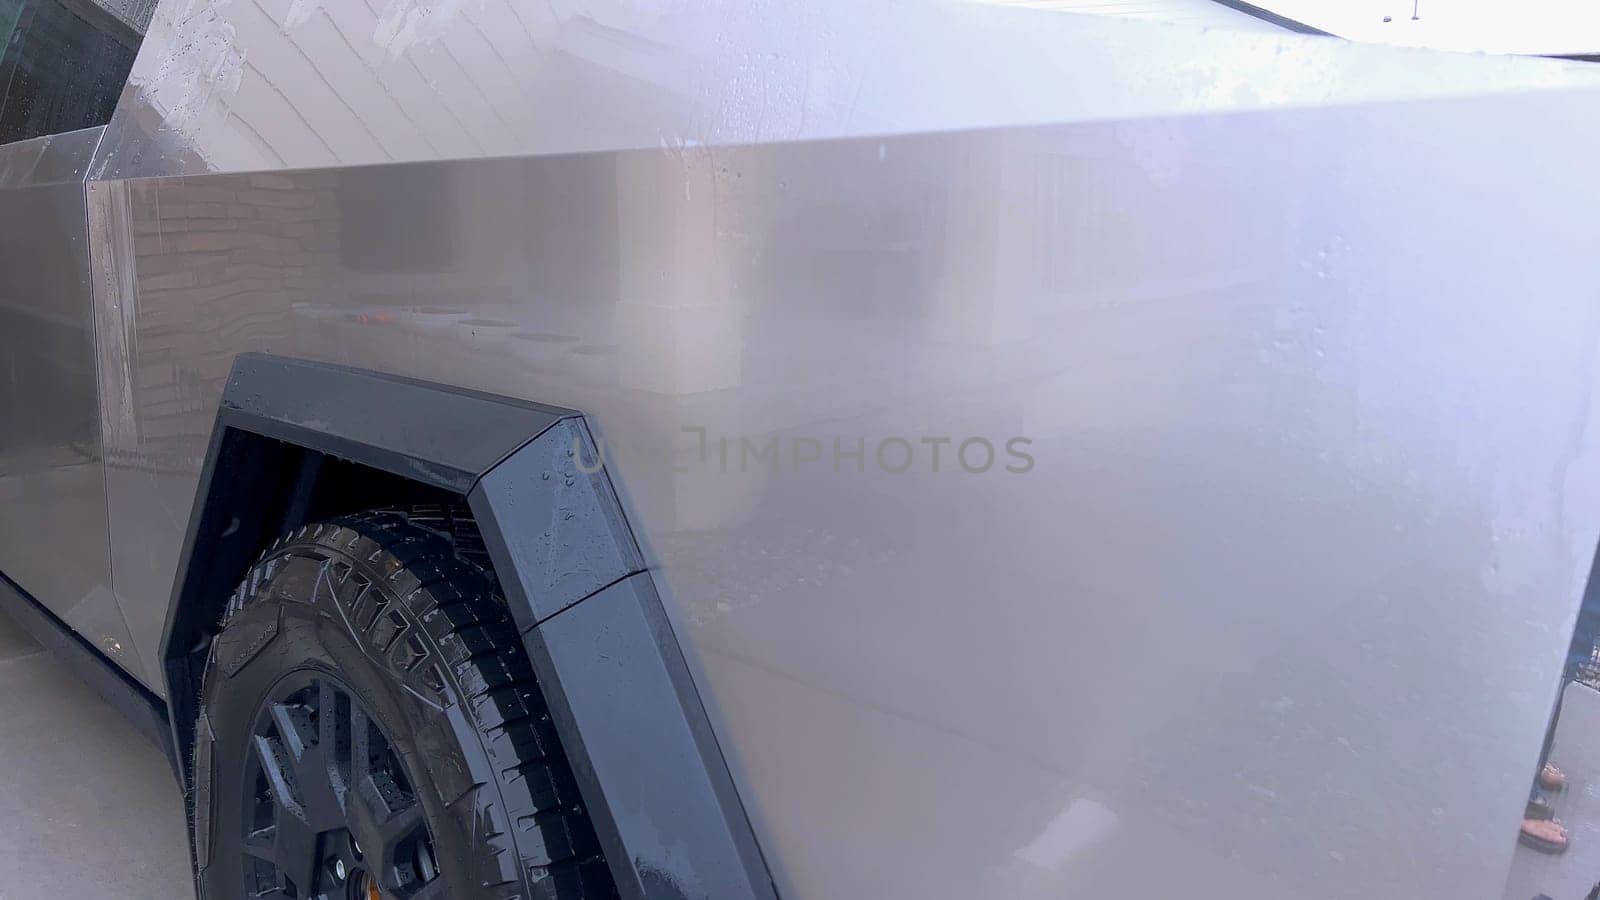 High-Pressure Cleaning of the Tesla Cybertruck Cargo Bed by arinahabich